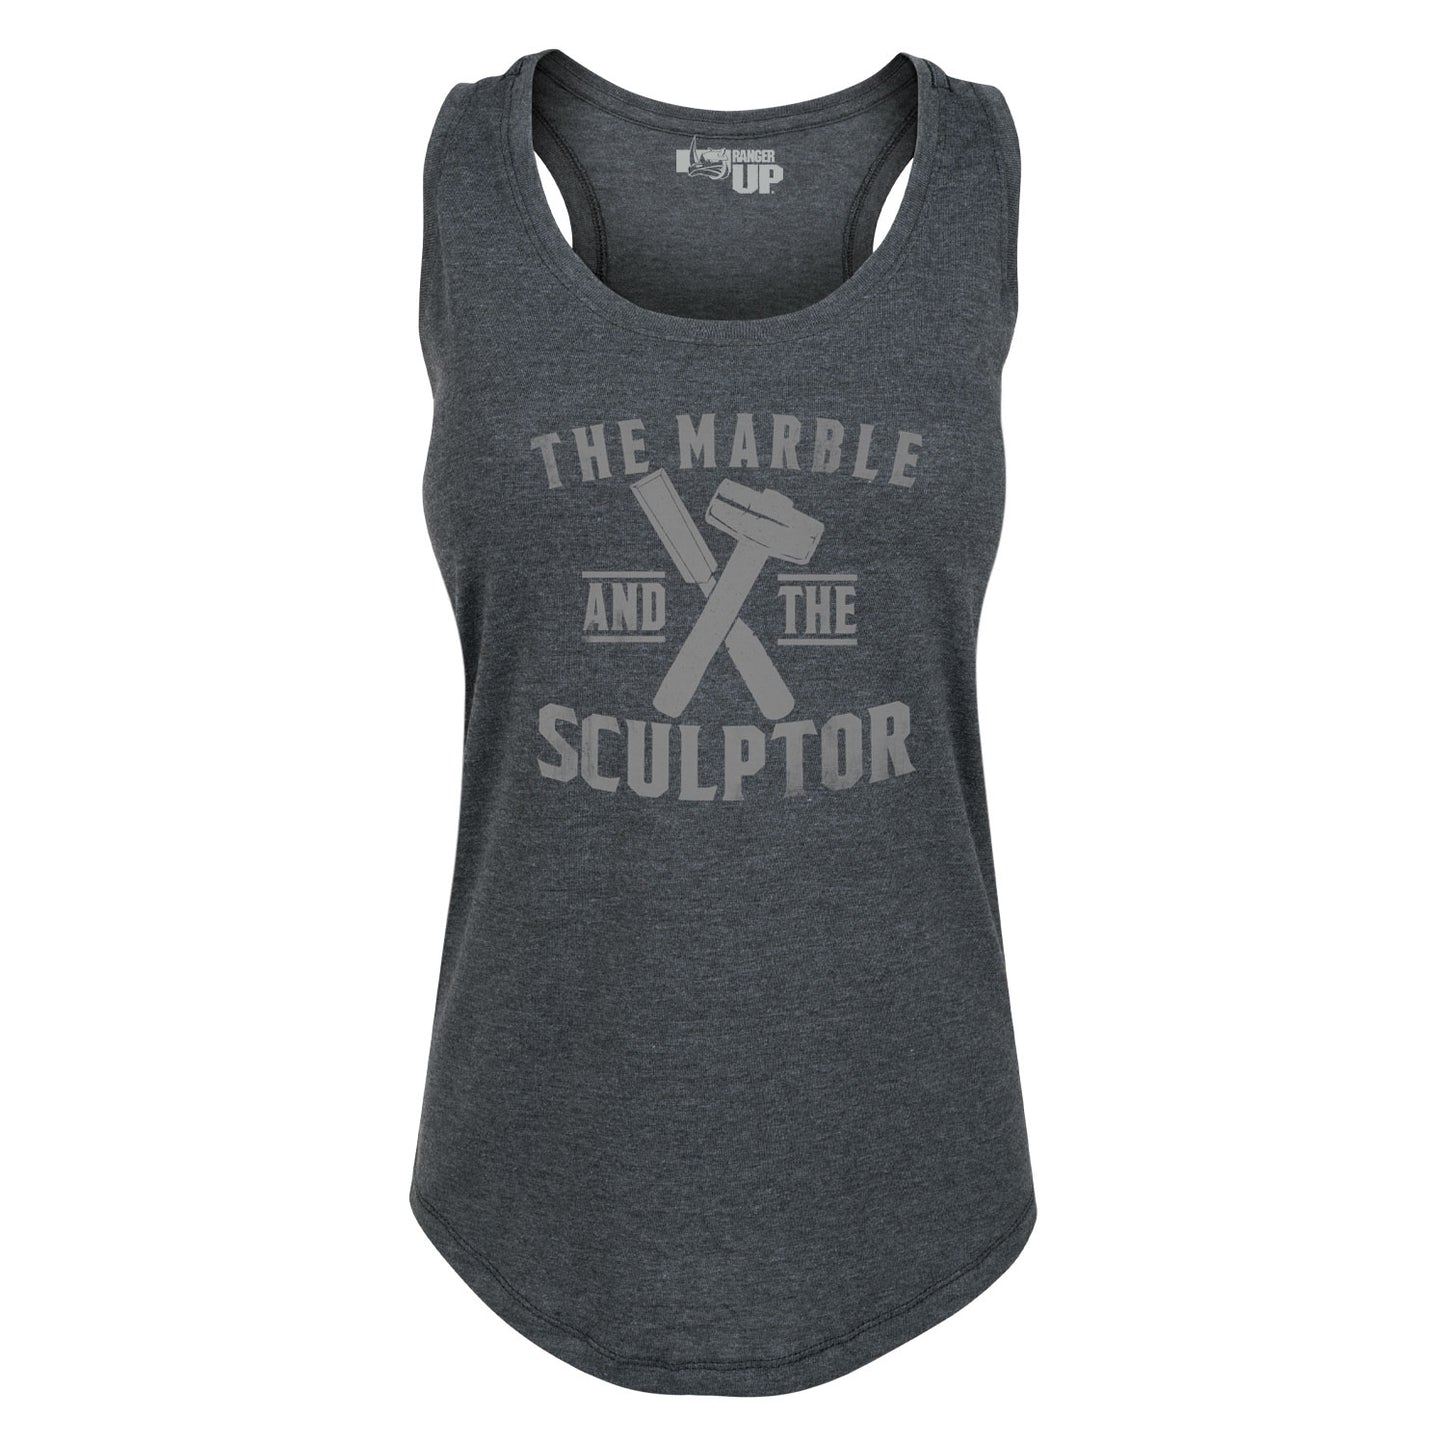 Women's Marble and Sculptor Tank